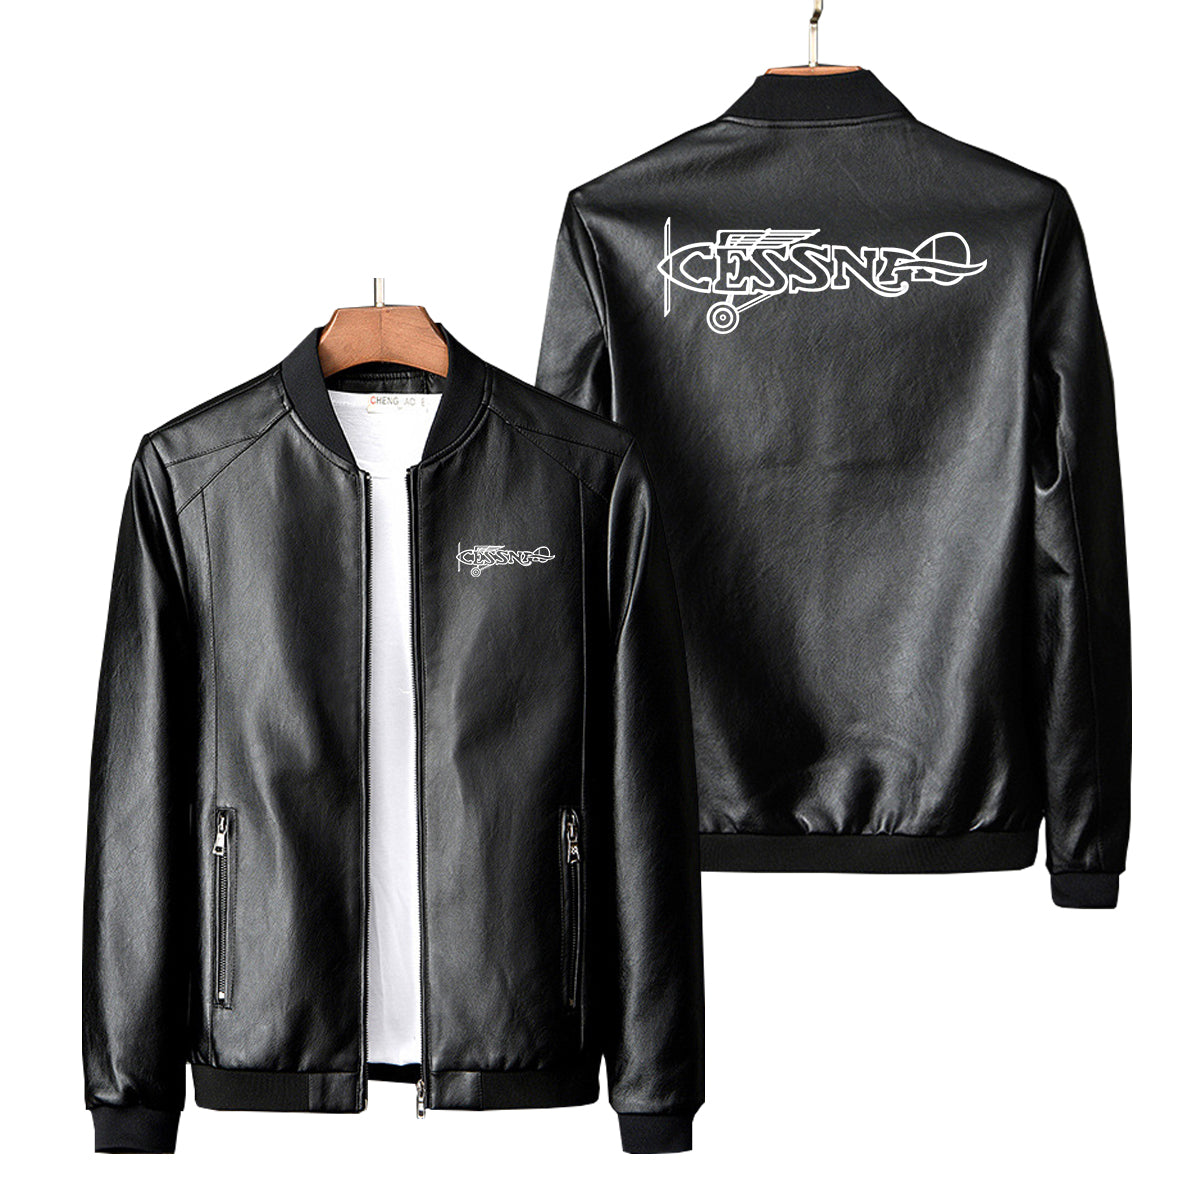 Special Cessna Text Designed PU Leather Jackets